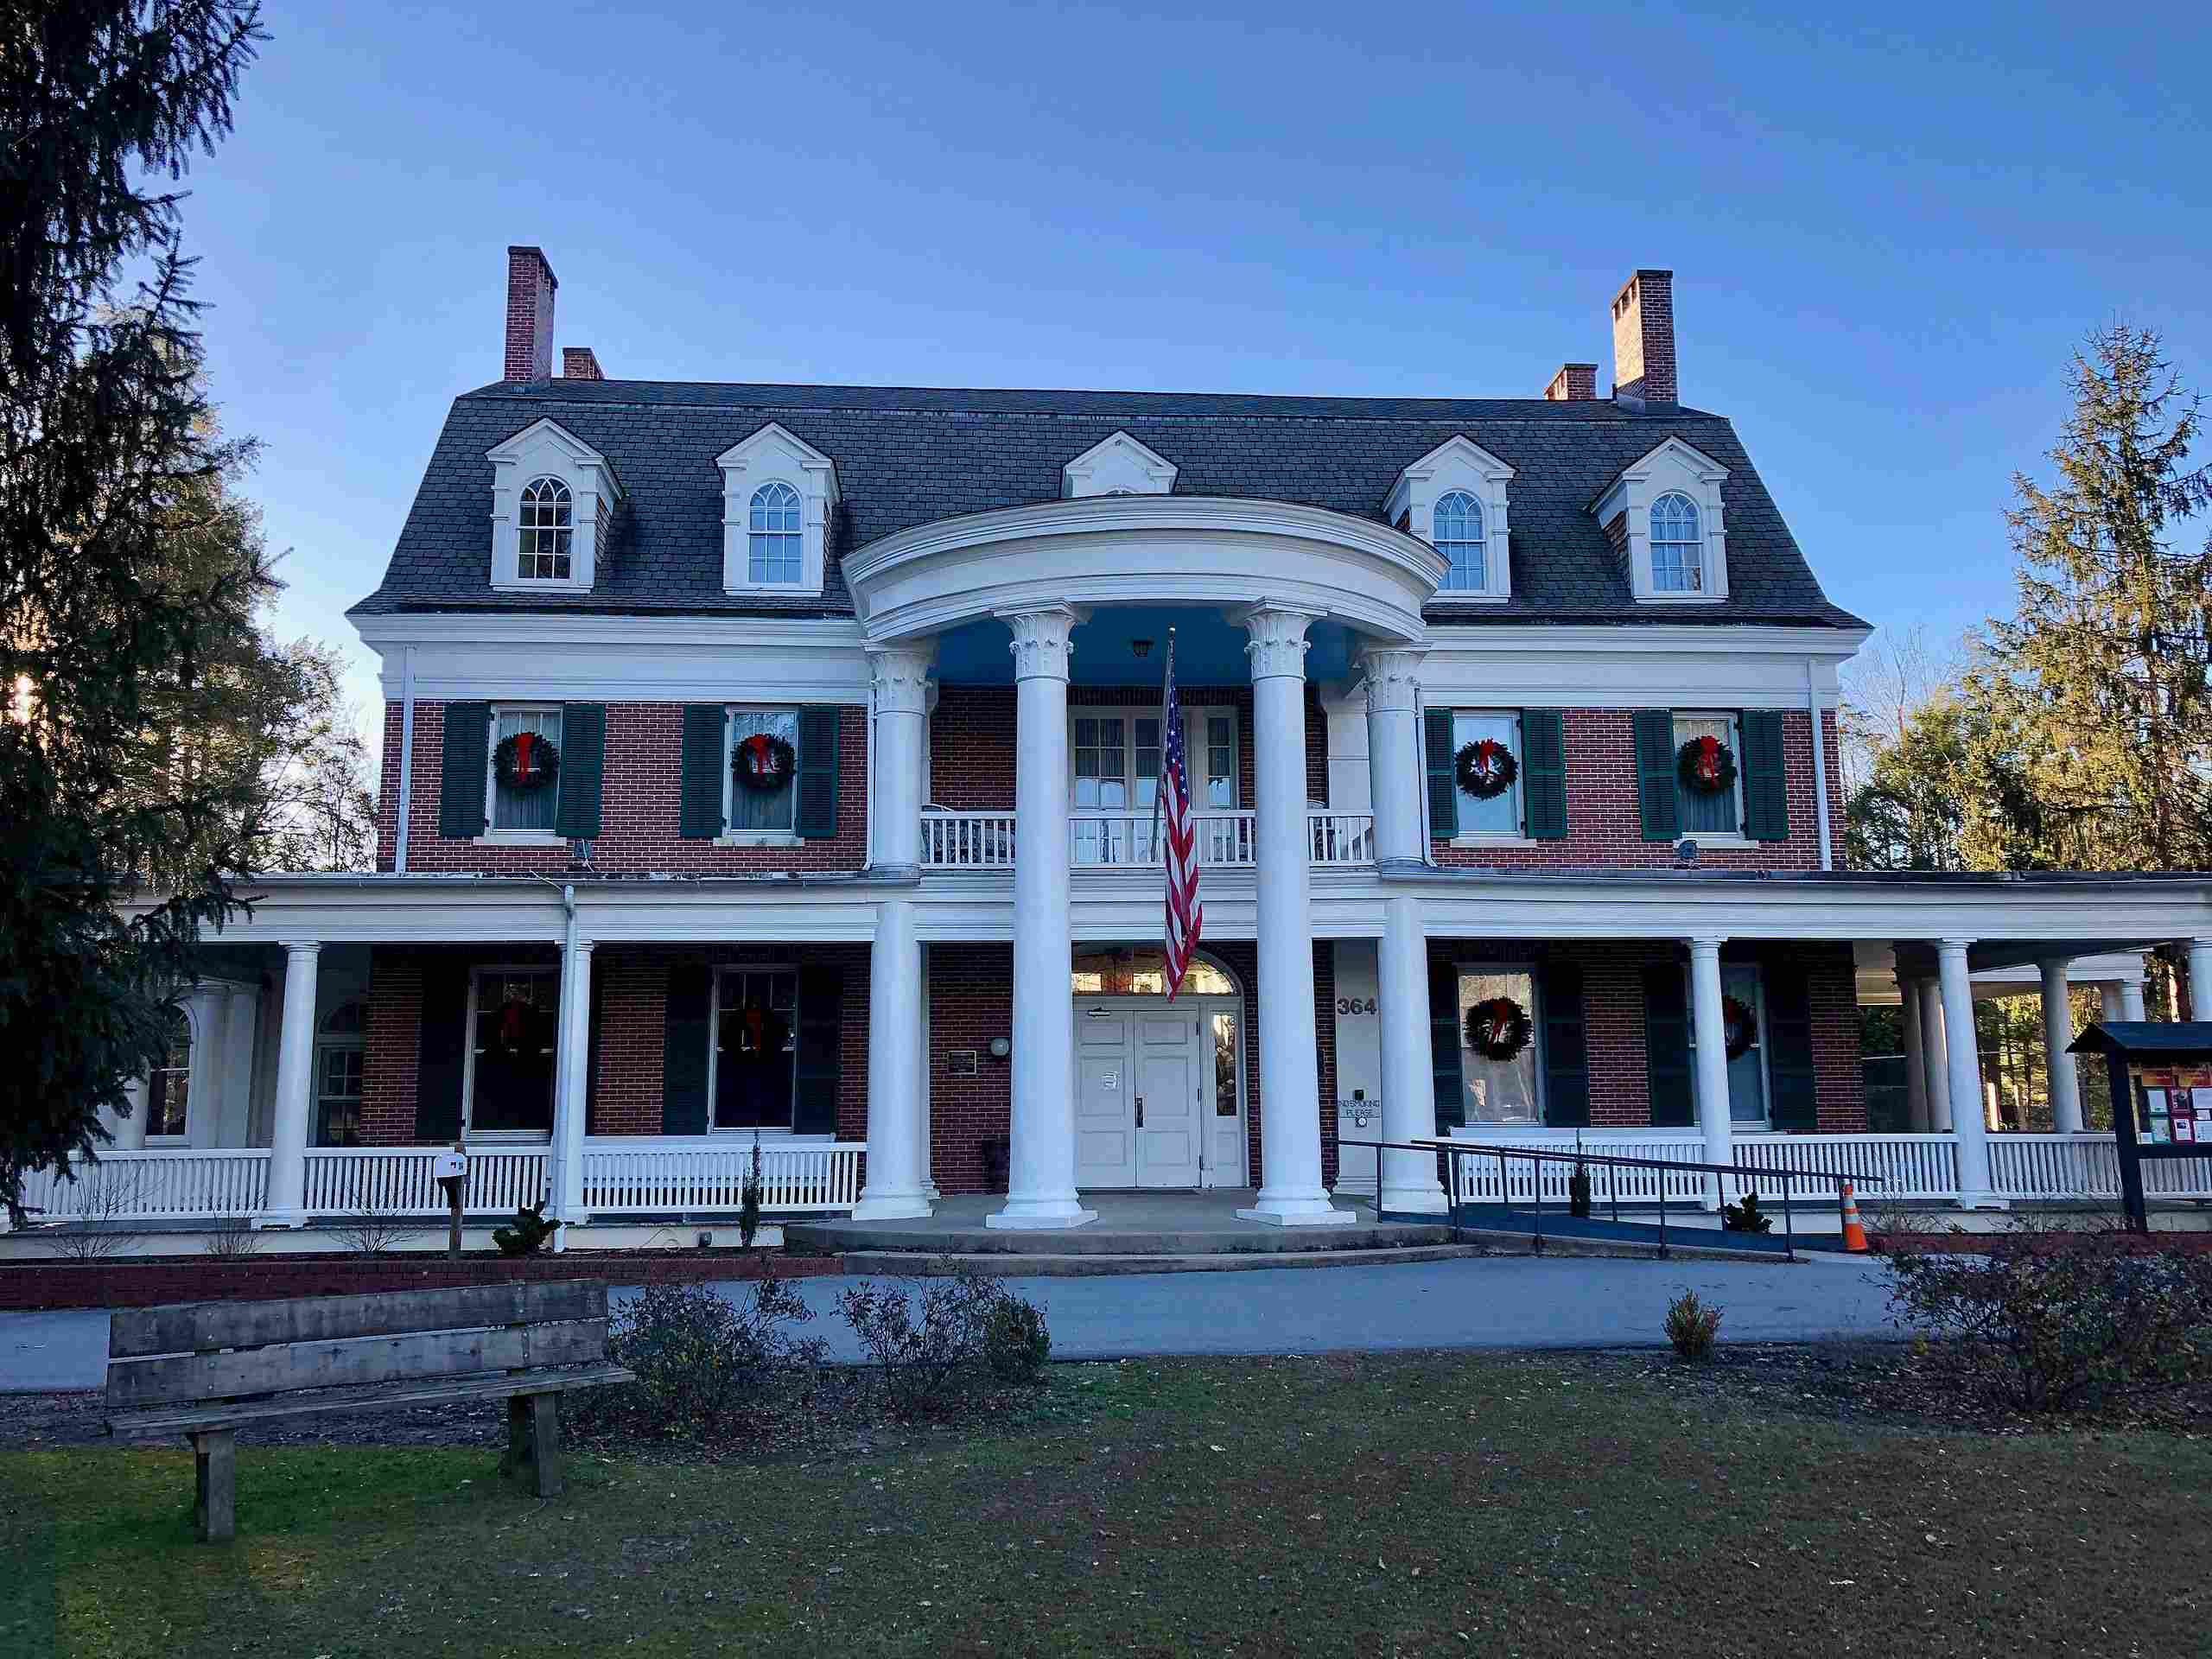 The Silvermont Mansion